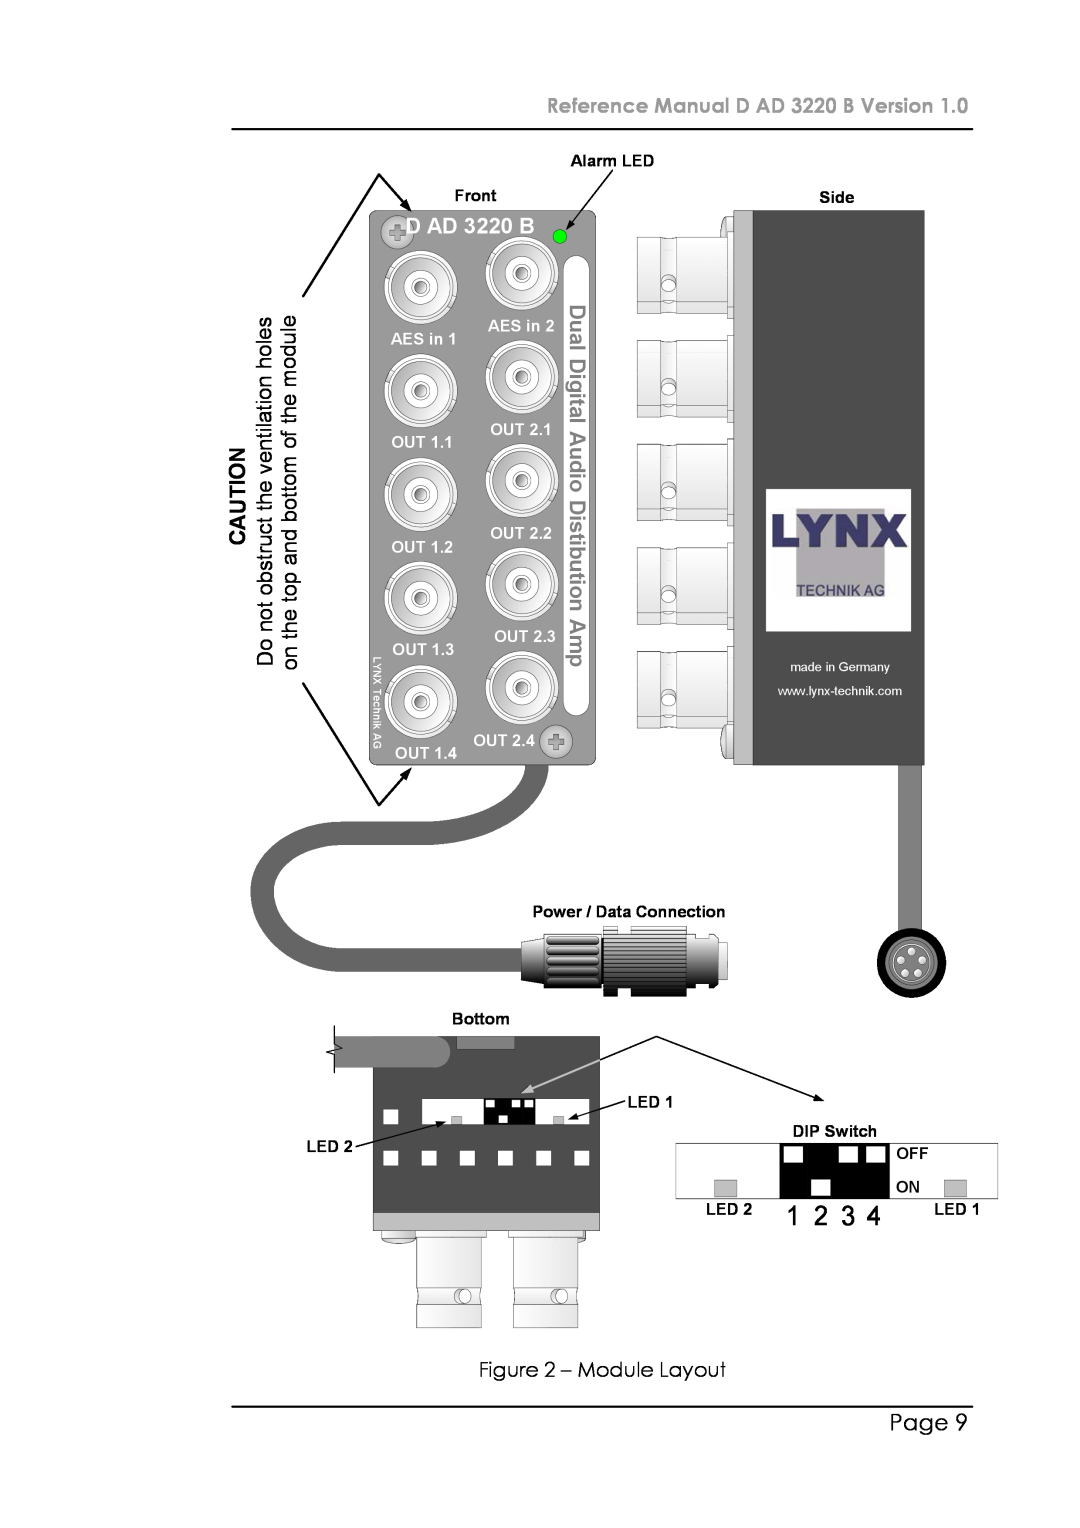 Lynx 1 2 3, Page, Reference Manual D AD 3220 B Version, Digital, Alarm LED Front, AES in, Distibution, Side, DIP Switch 